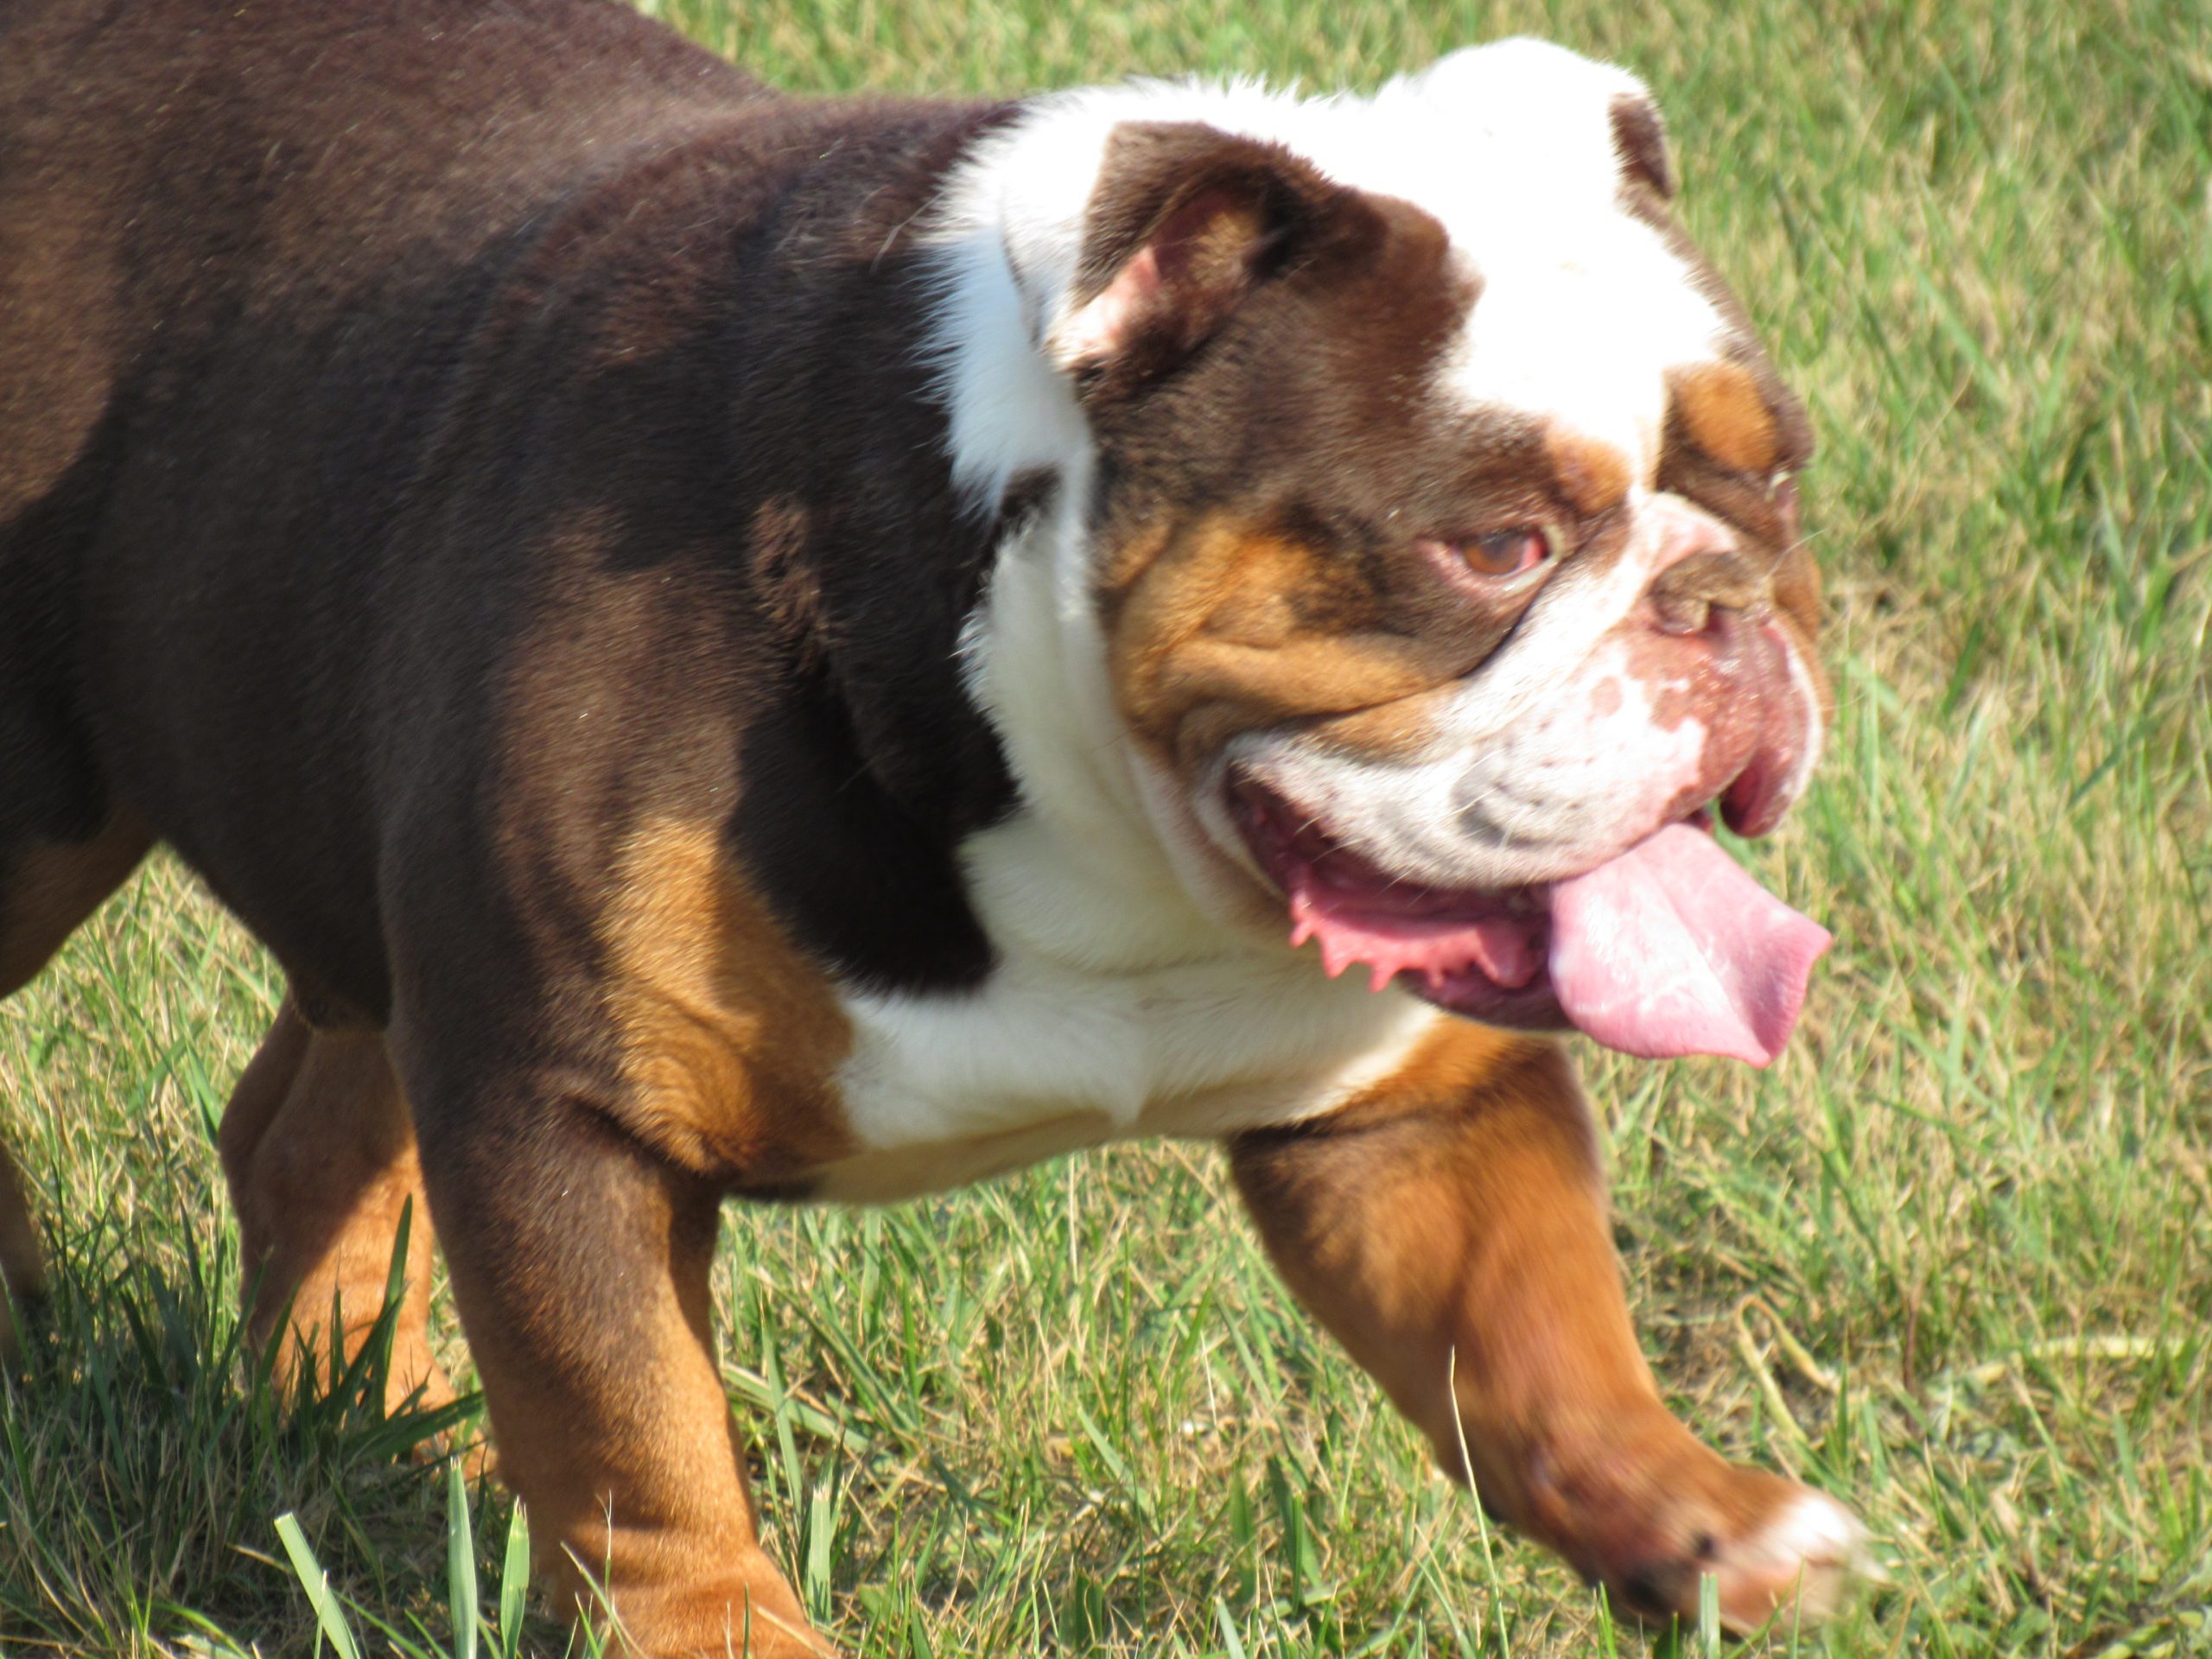 A Brown and White Bull Dog With its Tongue Out